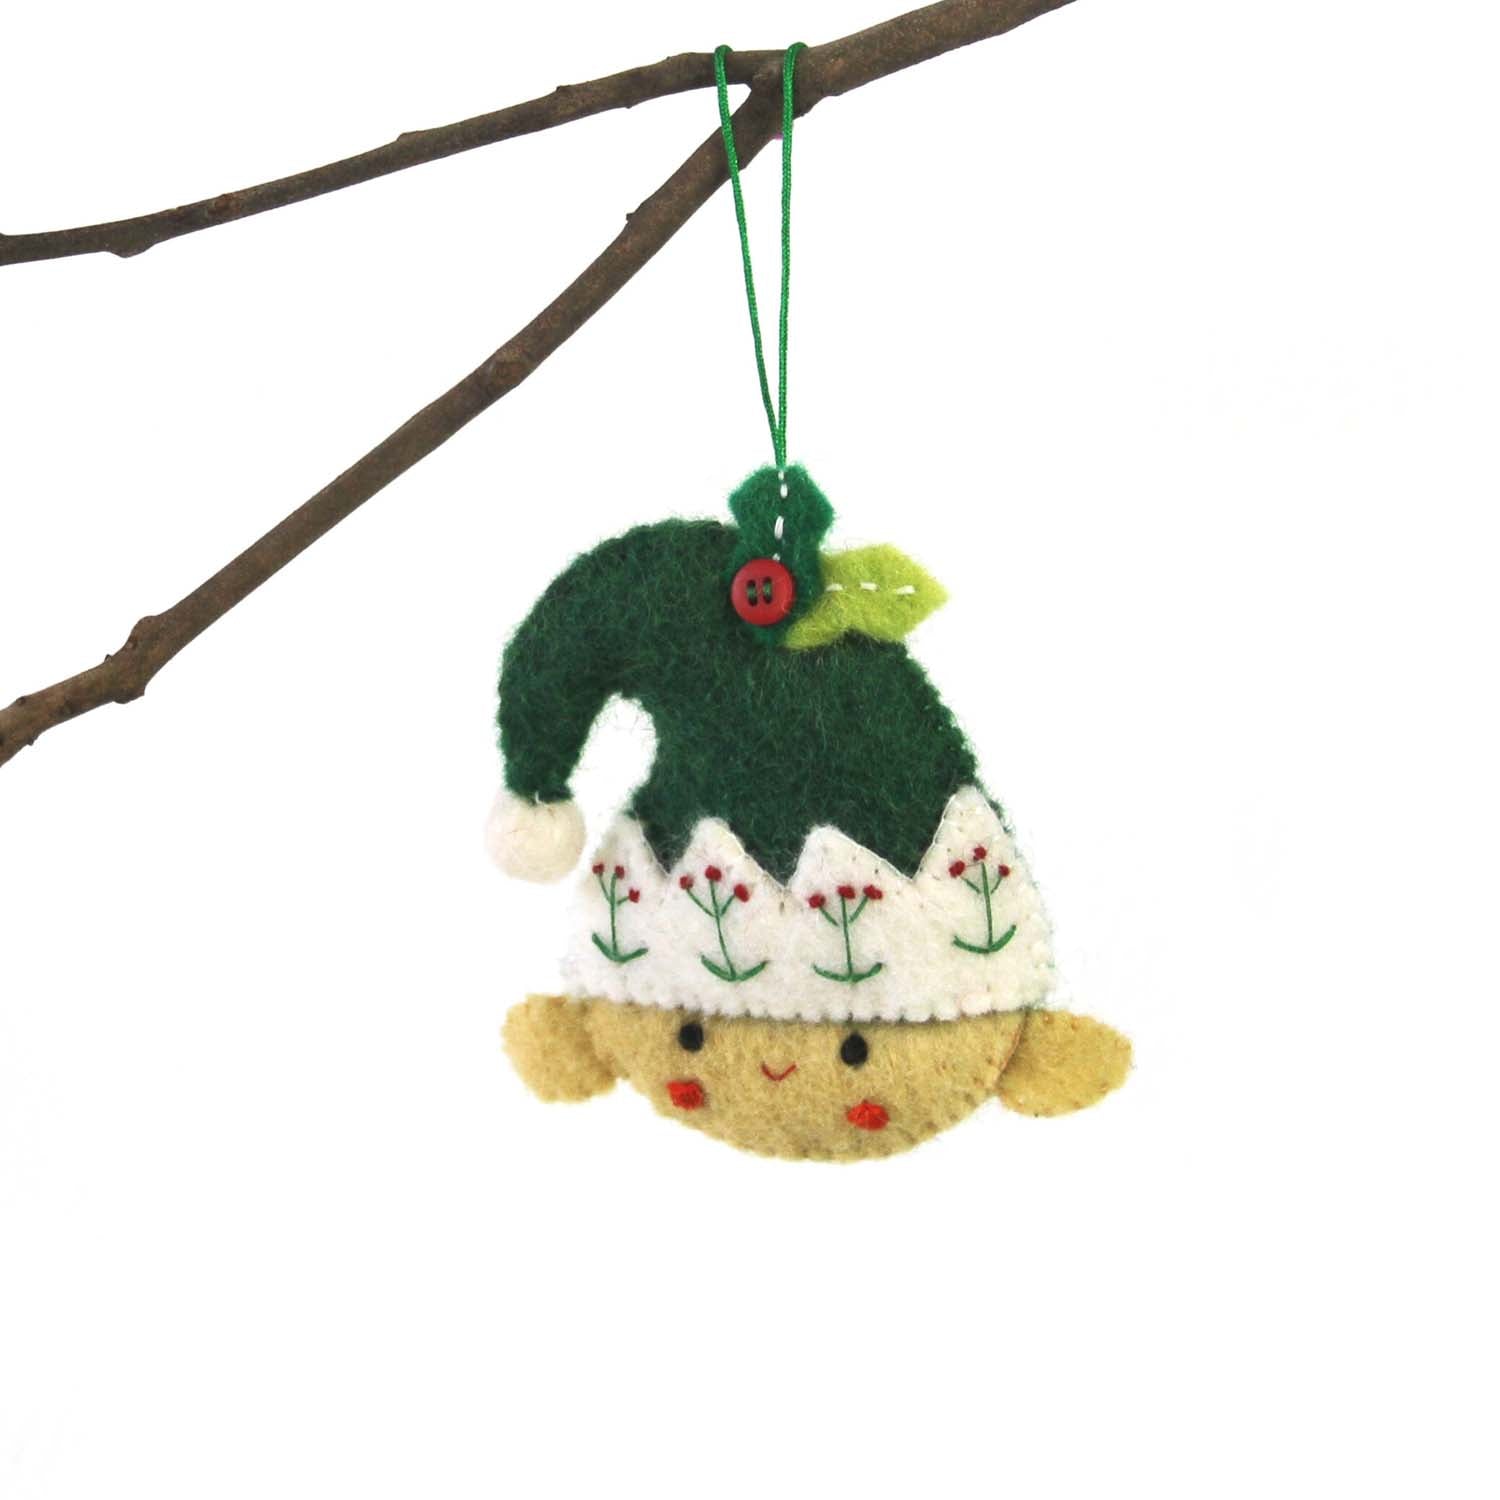 This Global Groove Life, handmade, ethical, fair trade, eco-friendly, sustainable, elf with green hat felt ornament was created by artisans in Kathmandu Nepal and will be a beautiful addition to your Christmas tree this holiday season.